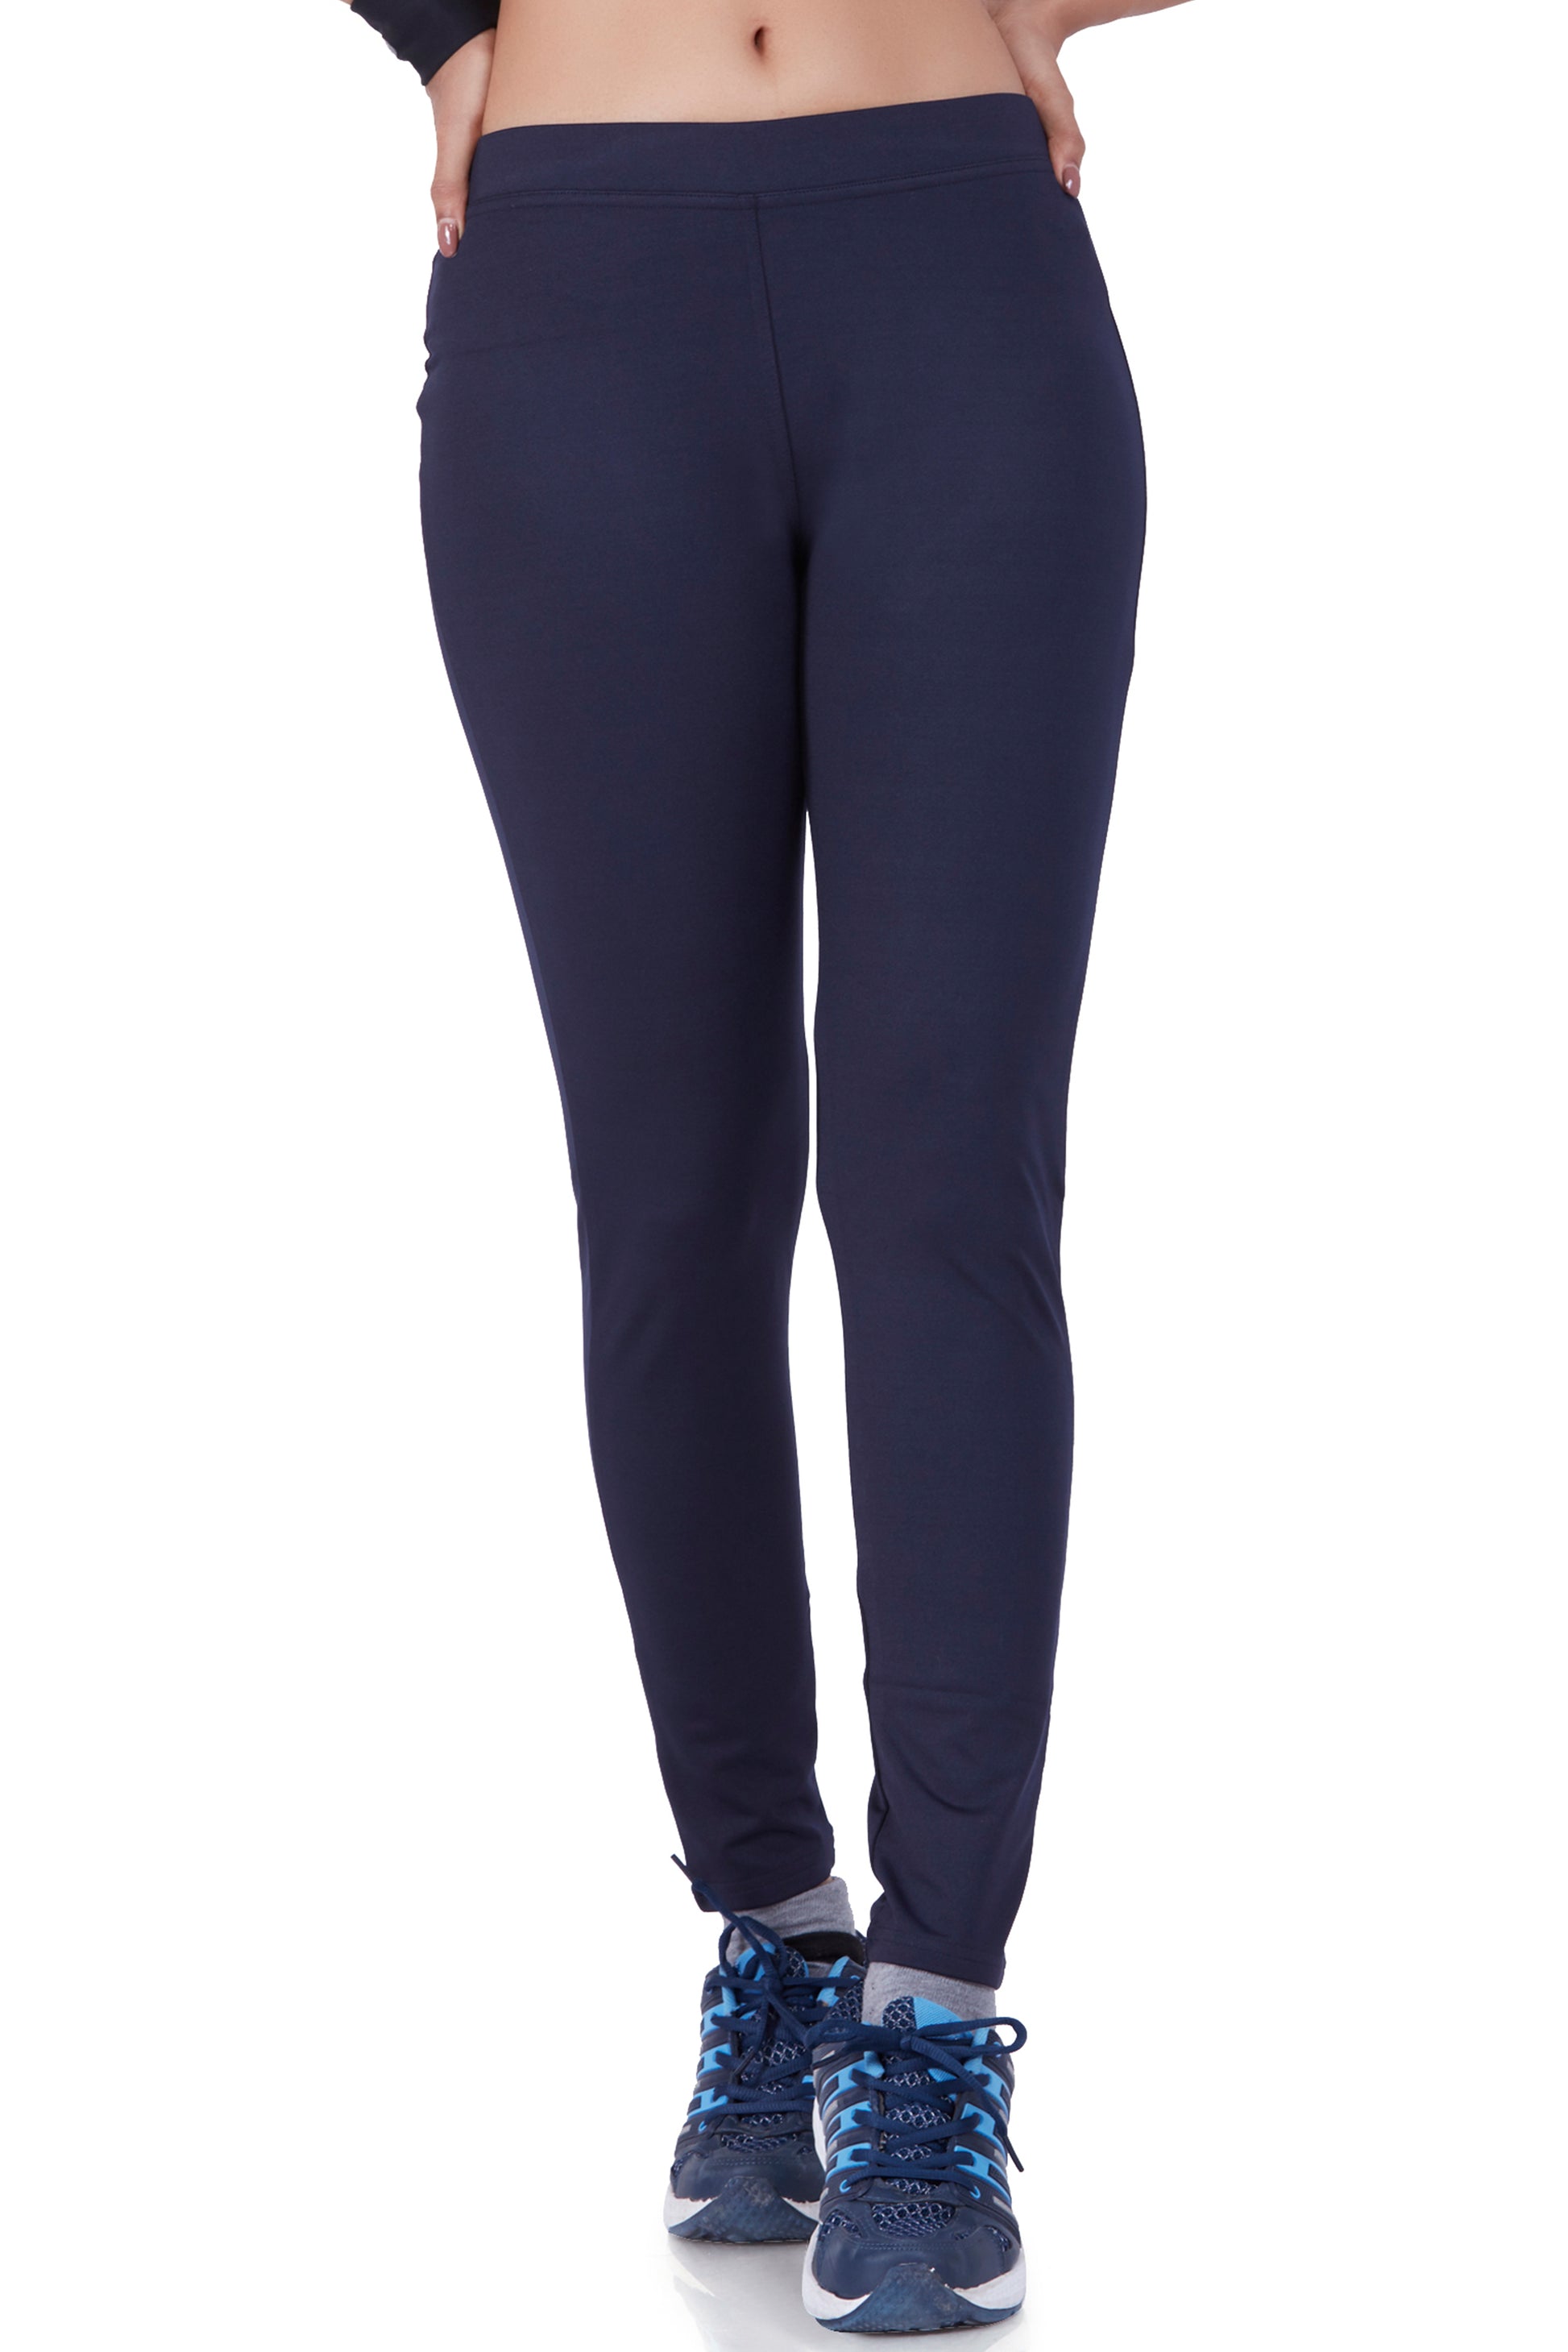 Women's Leggings for sale in Chaguanas, Trinidad and Tobago